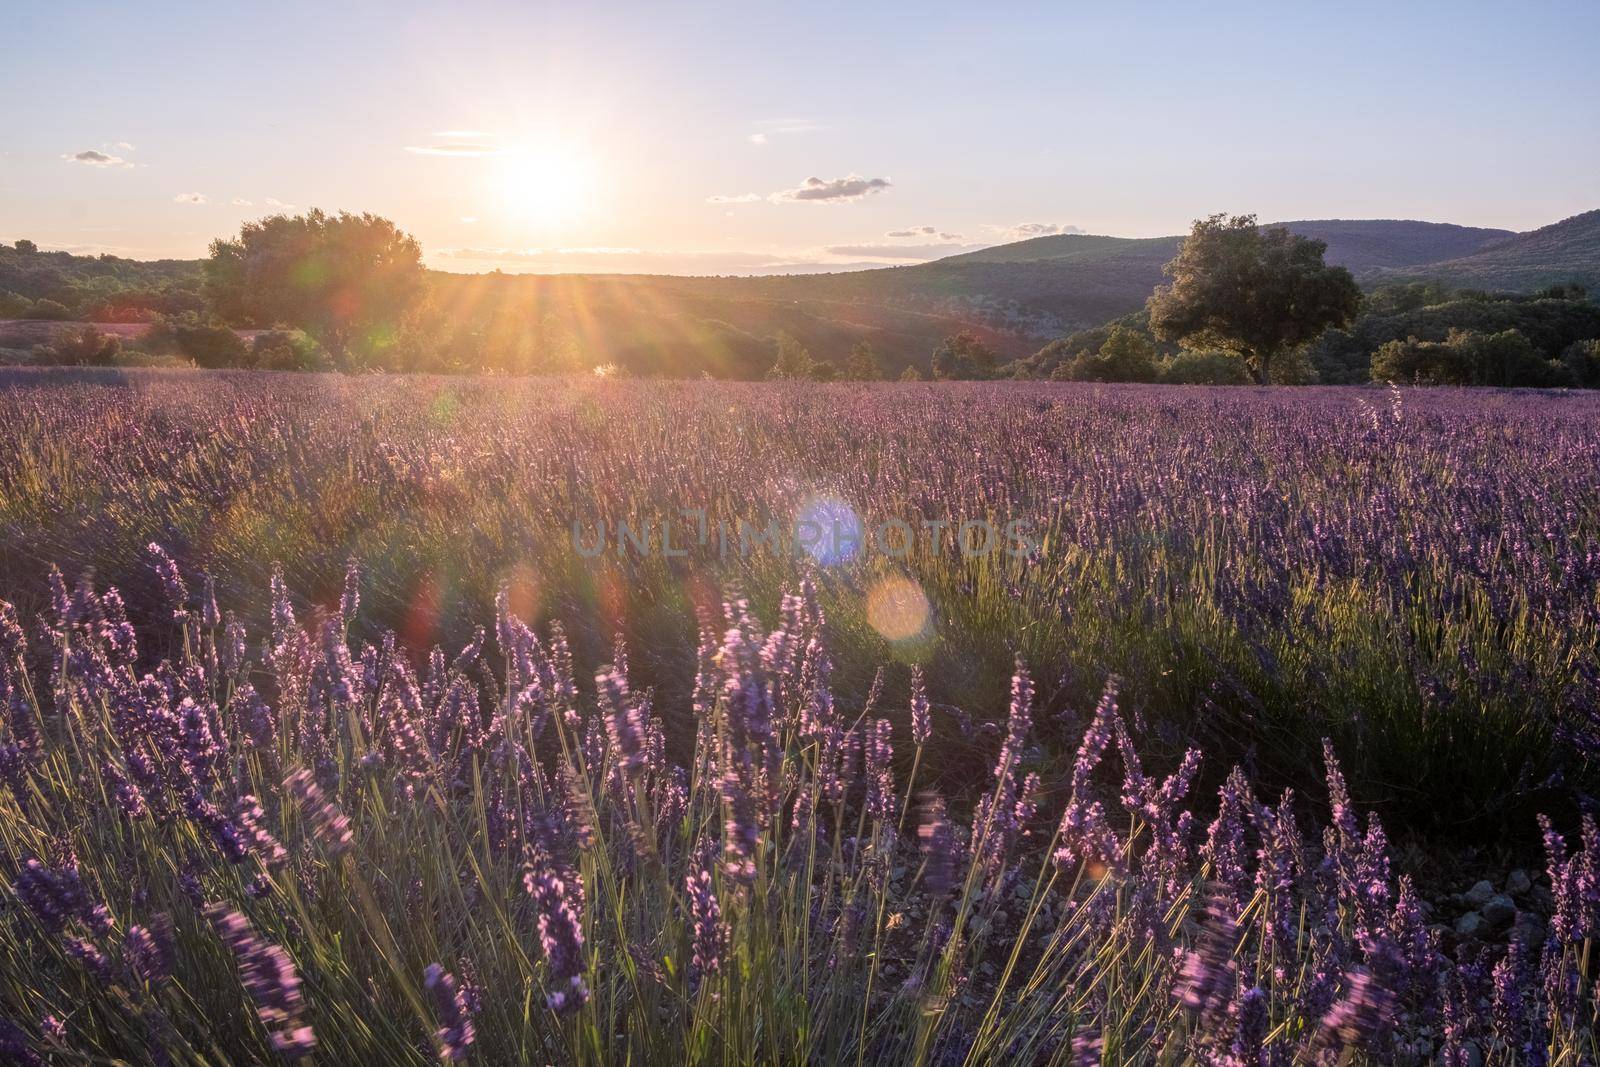 Ardeche lavender fields in the south of France during sunset, Lavender fields in Ardeche in southeast France by fokkebok